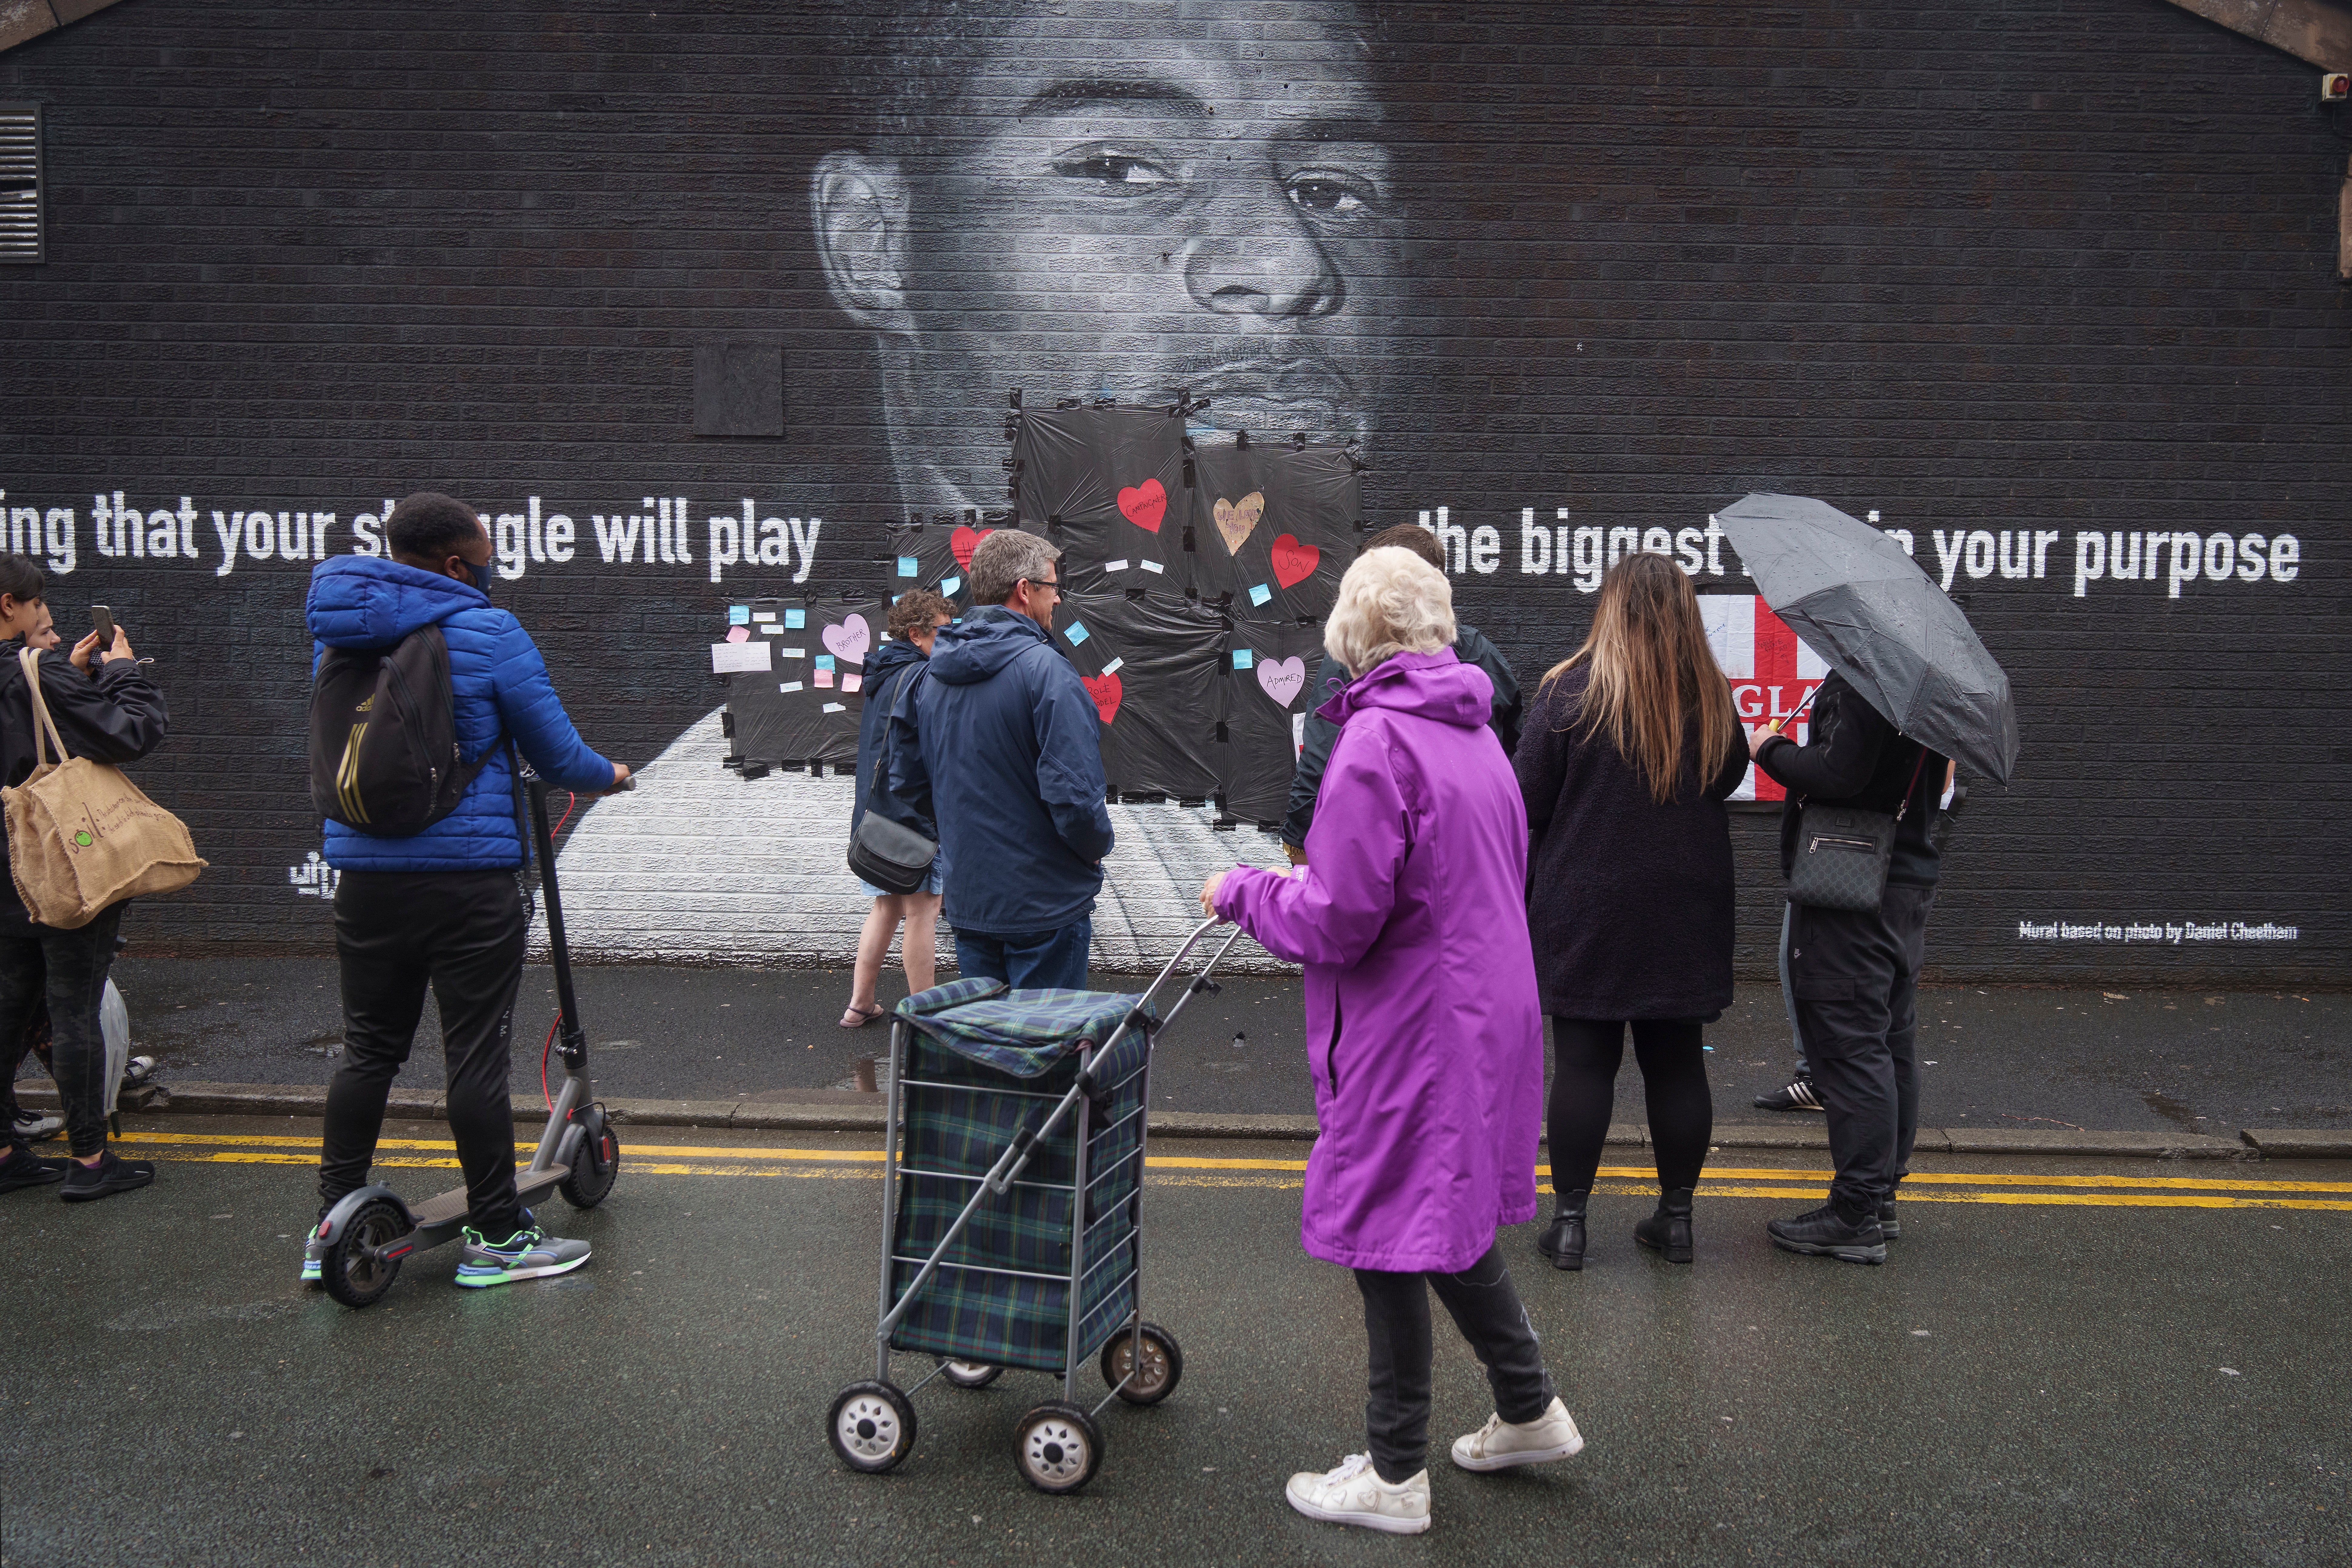 Local residents put messages of support on the plastic that covers offensive graffiti on the mural of striker Marcus Rashford in Withington, Manchester